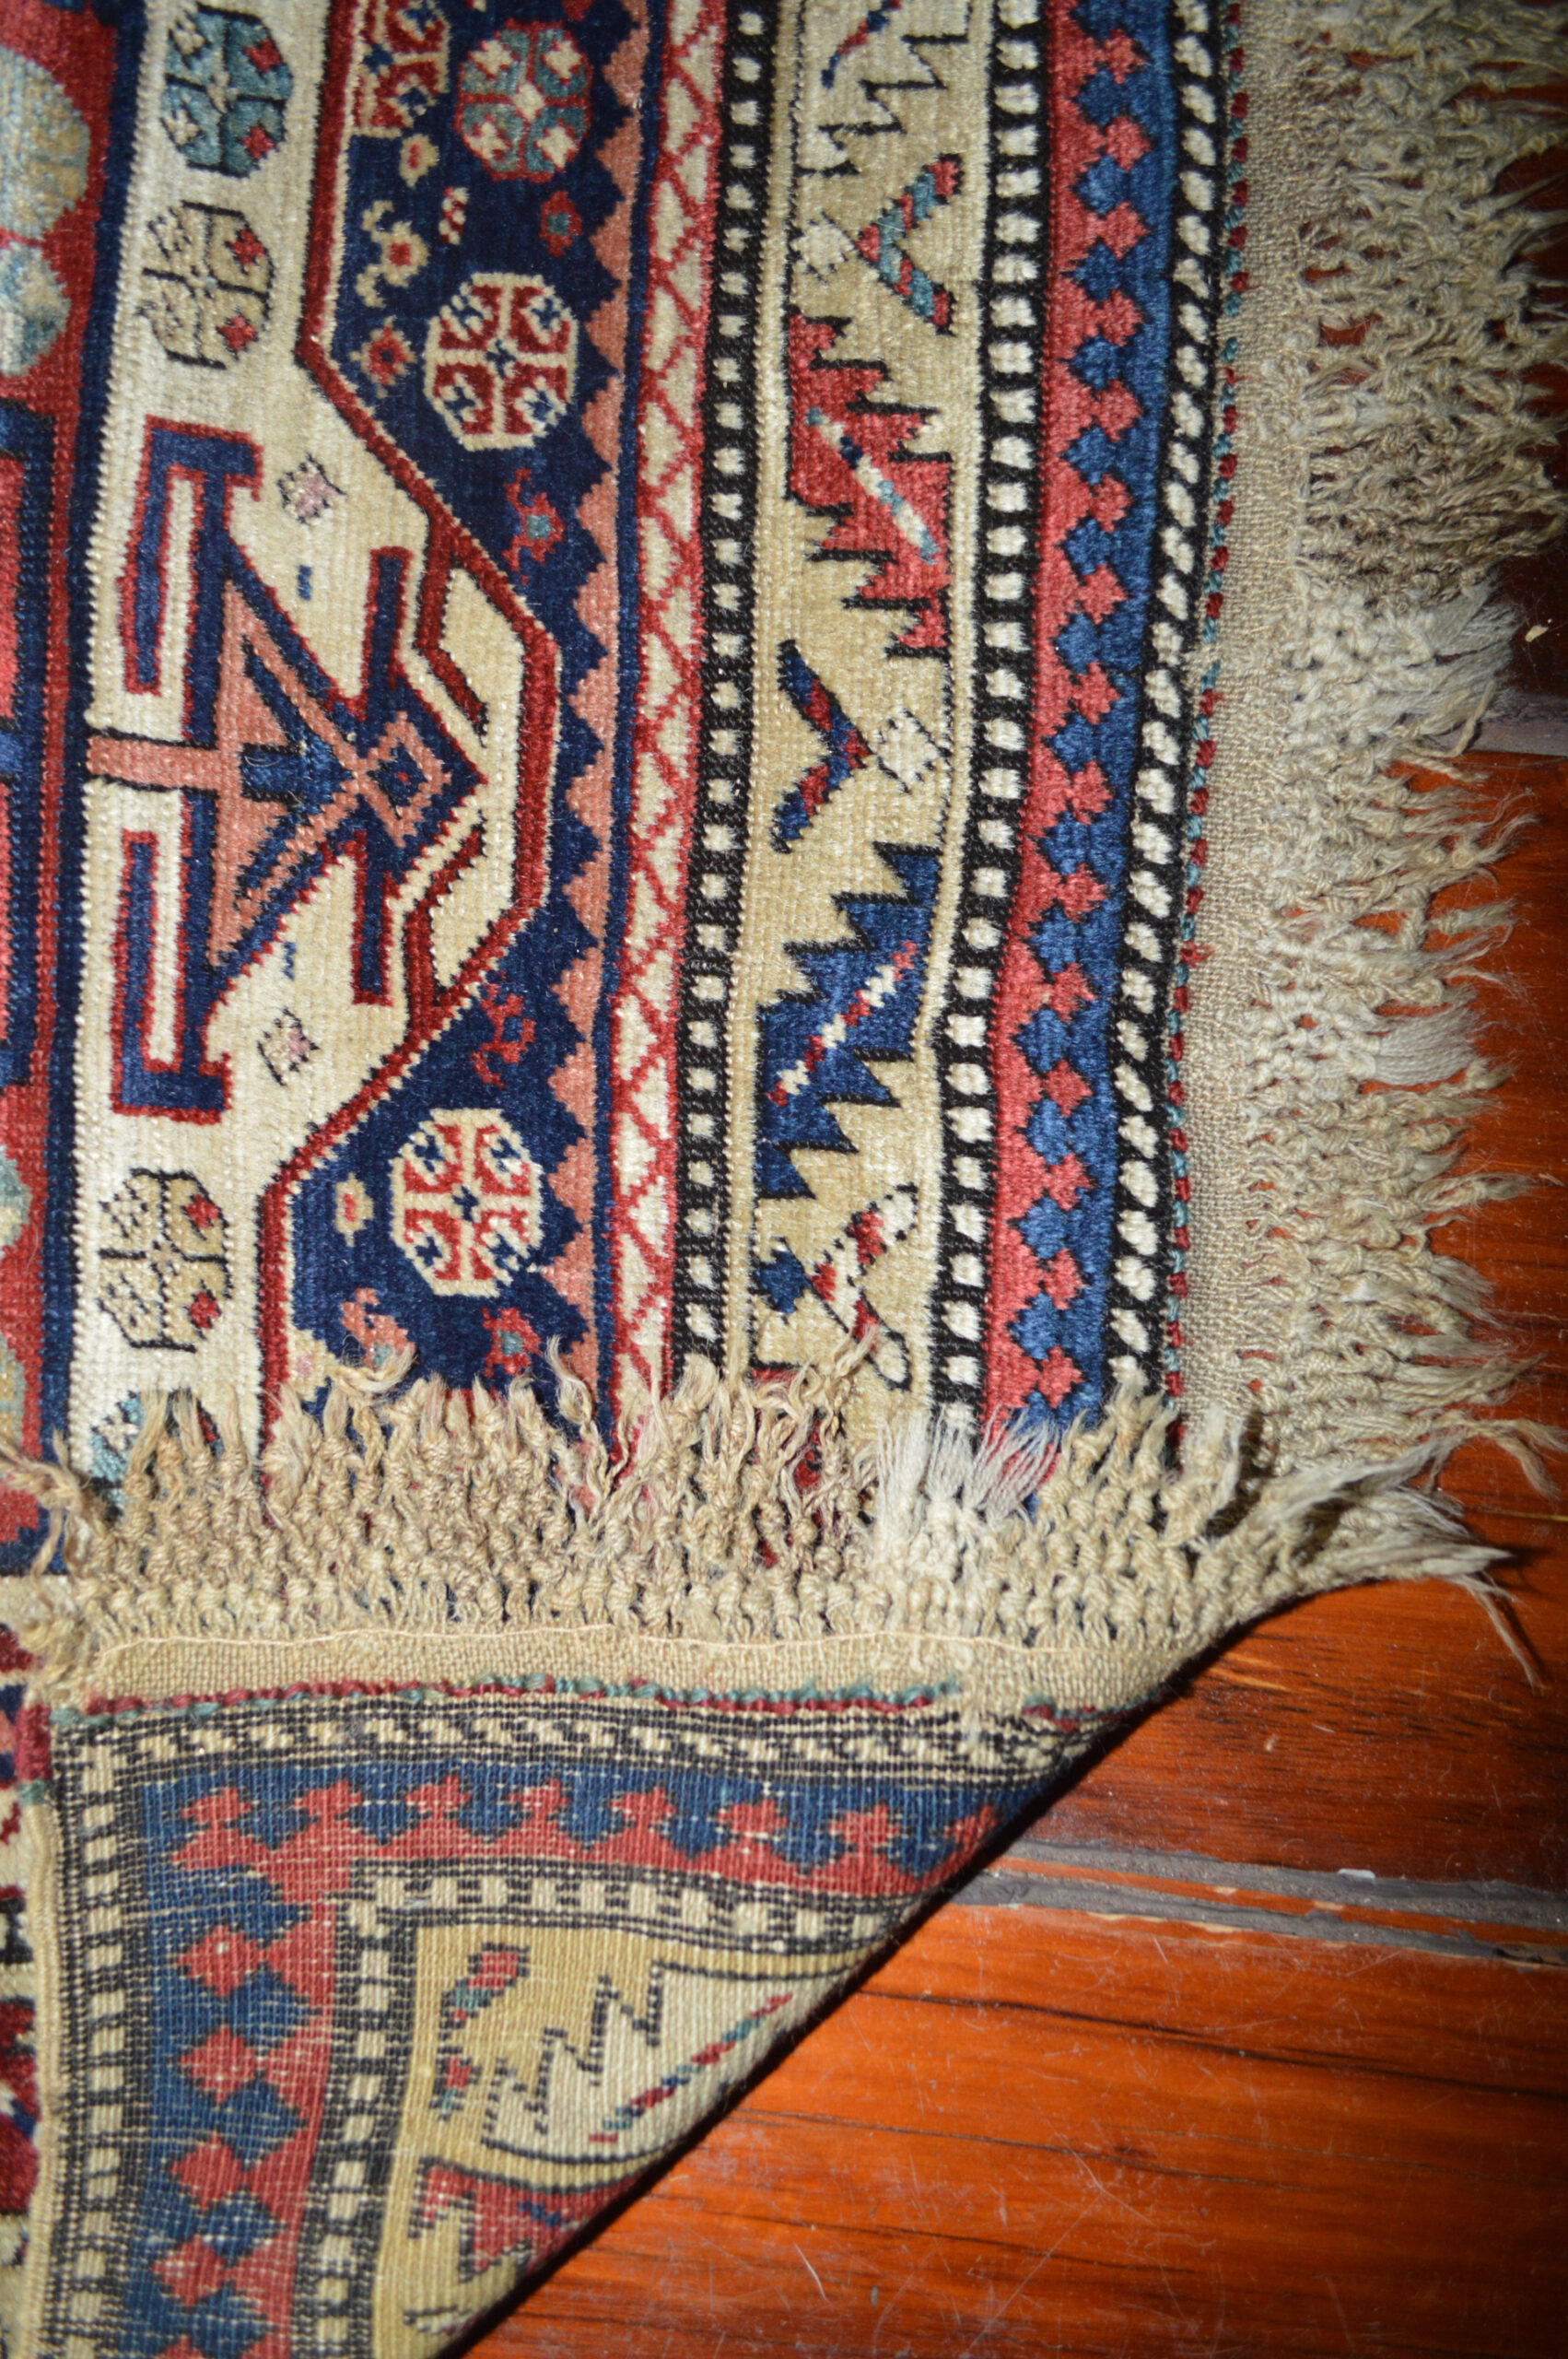 Weave detail from an antique Caucasian Surahani long rug or short runner, Douglas stock Gallery, antique Oriental rugs New England